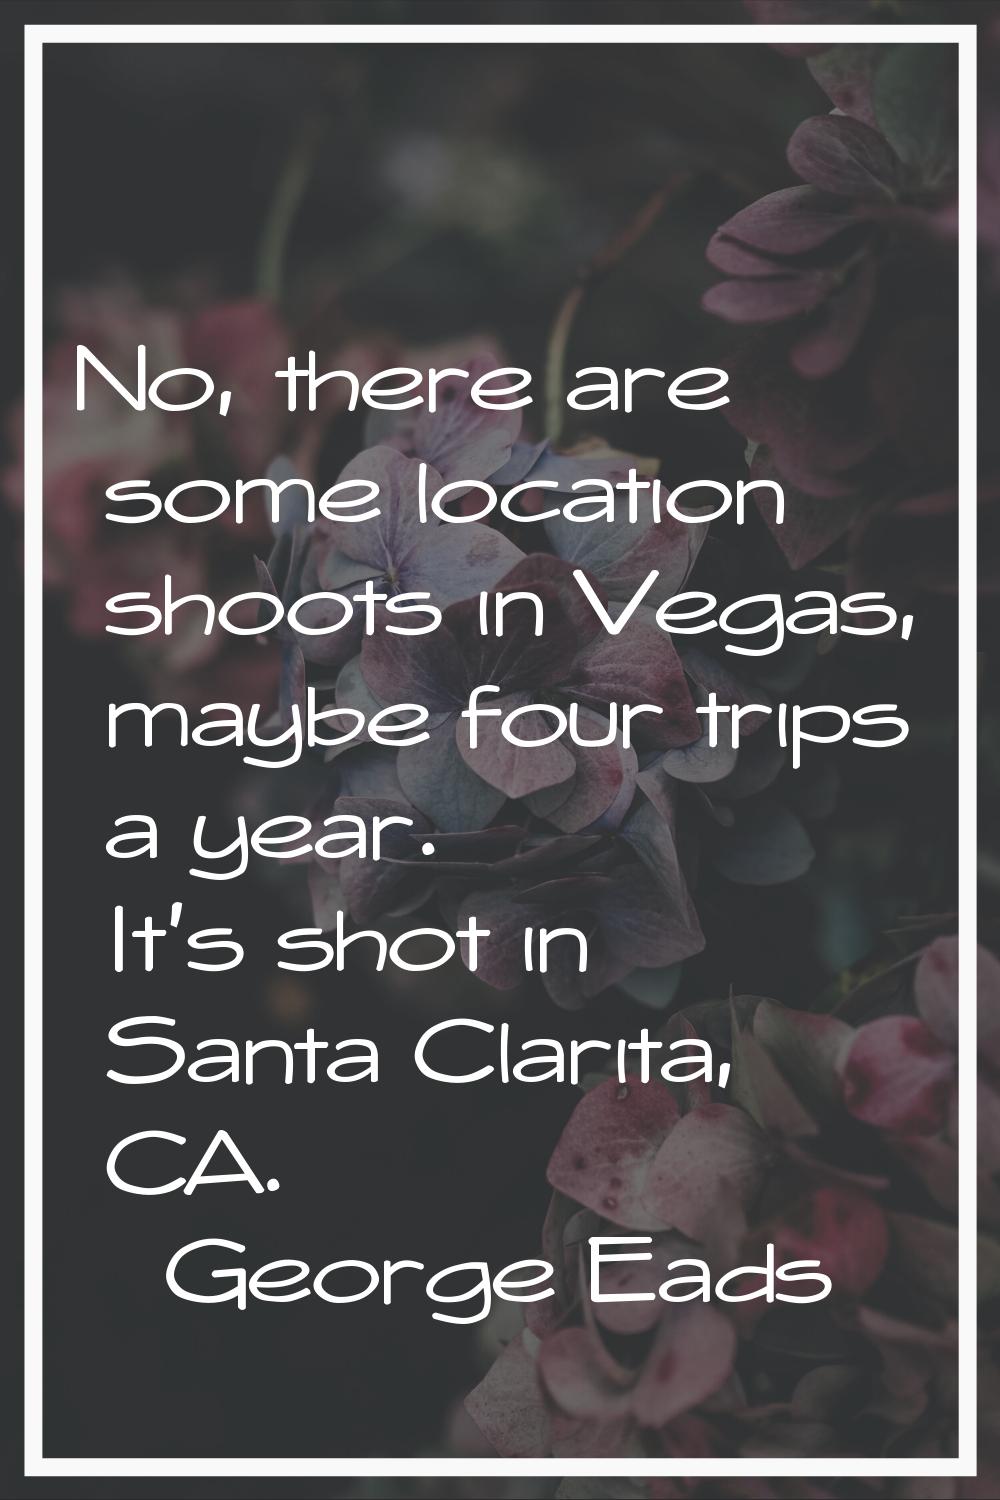 No, there are some location shoots in Vegas, maybe four trips a year. It's shot in Santa Clarita, C